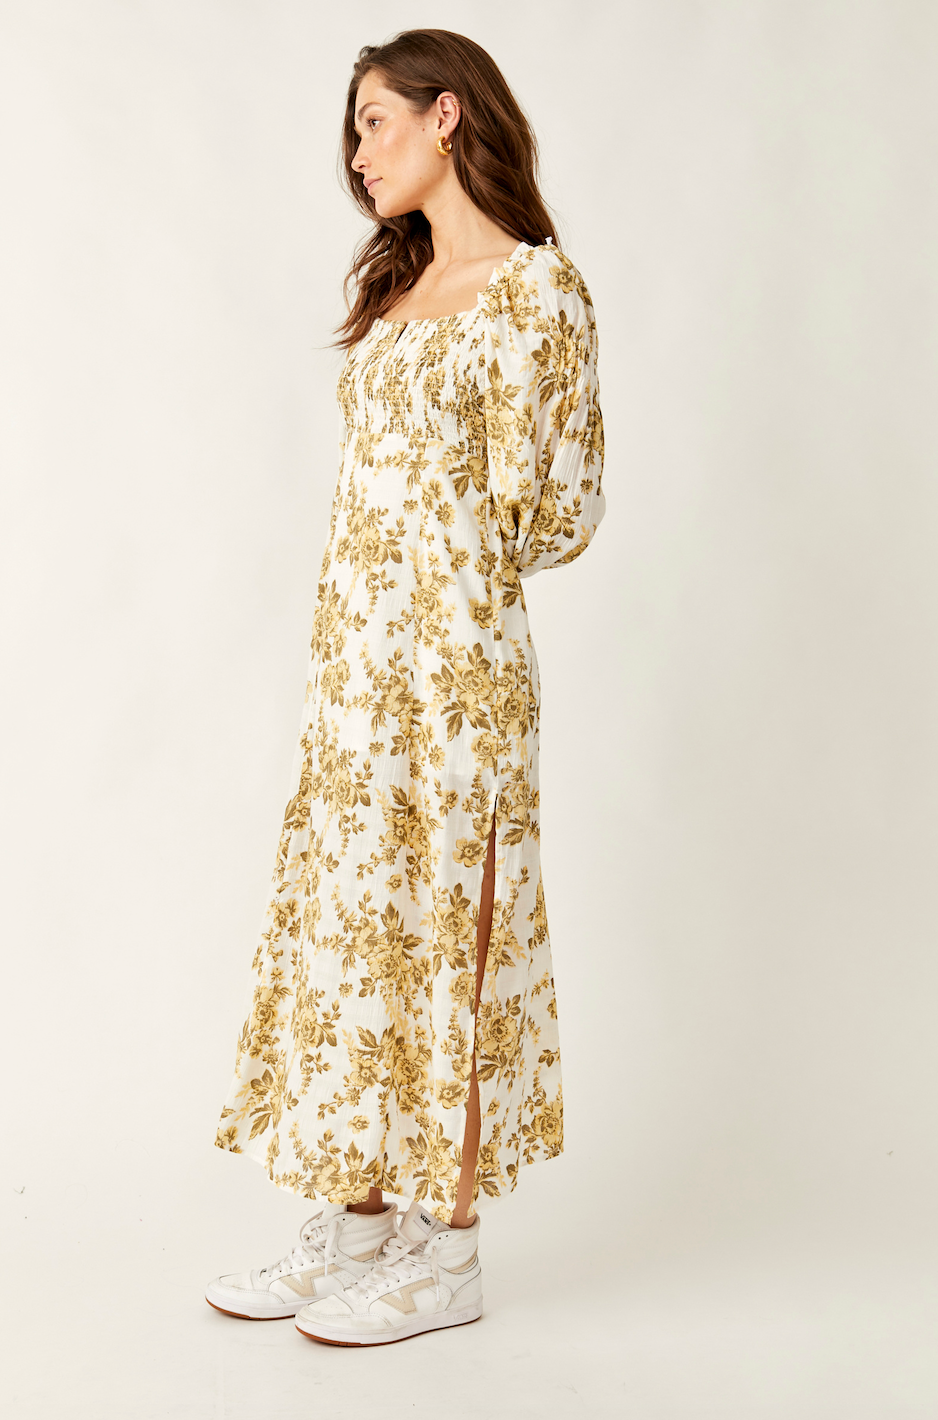 FREE PEOPLE JAYMES MIDI DRESS IN PASTRY CREAM COMBO